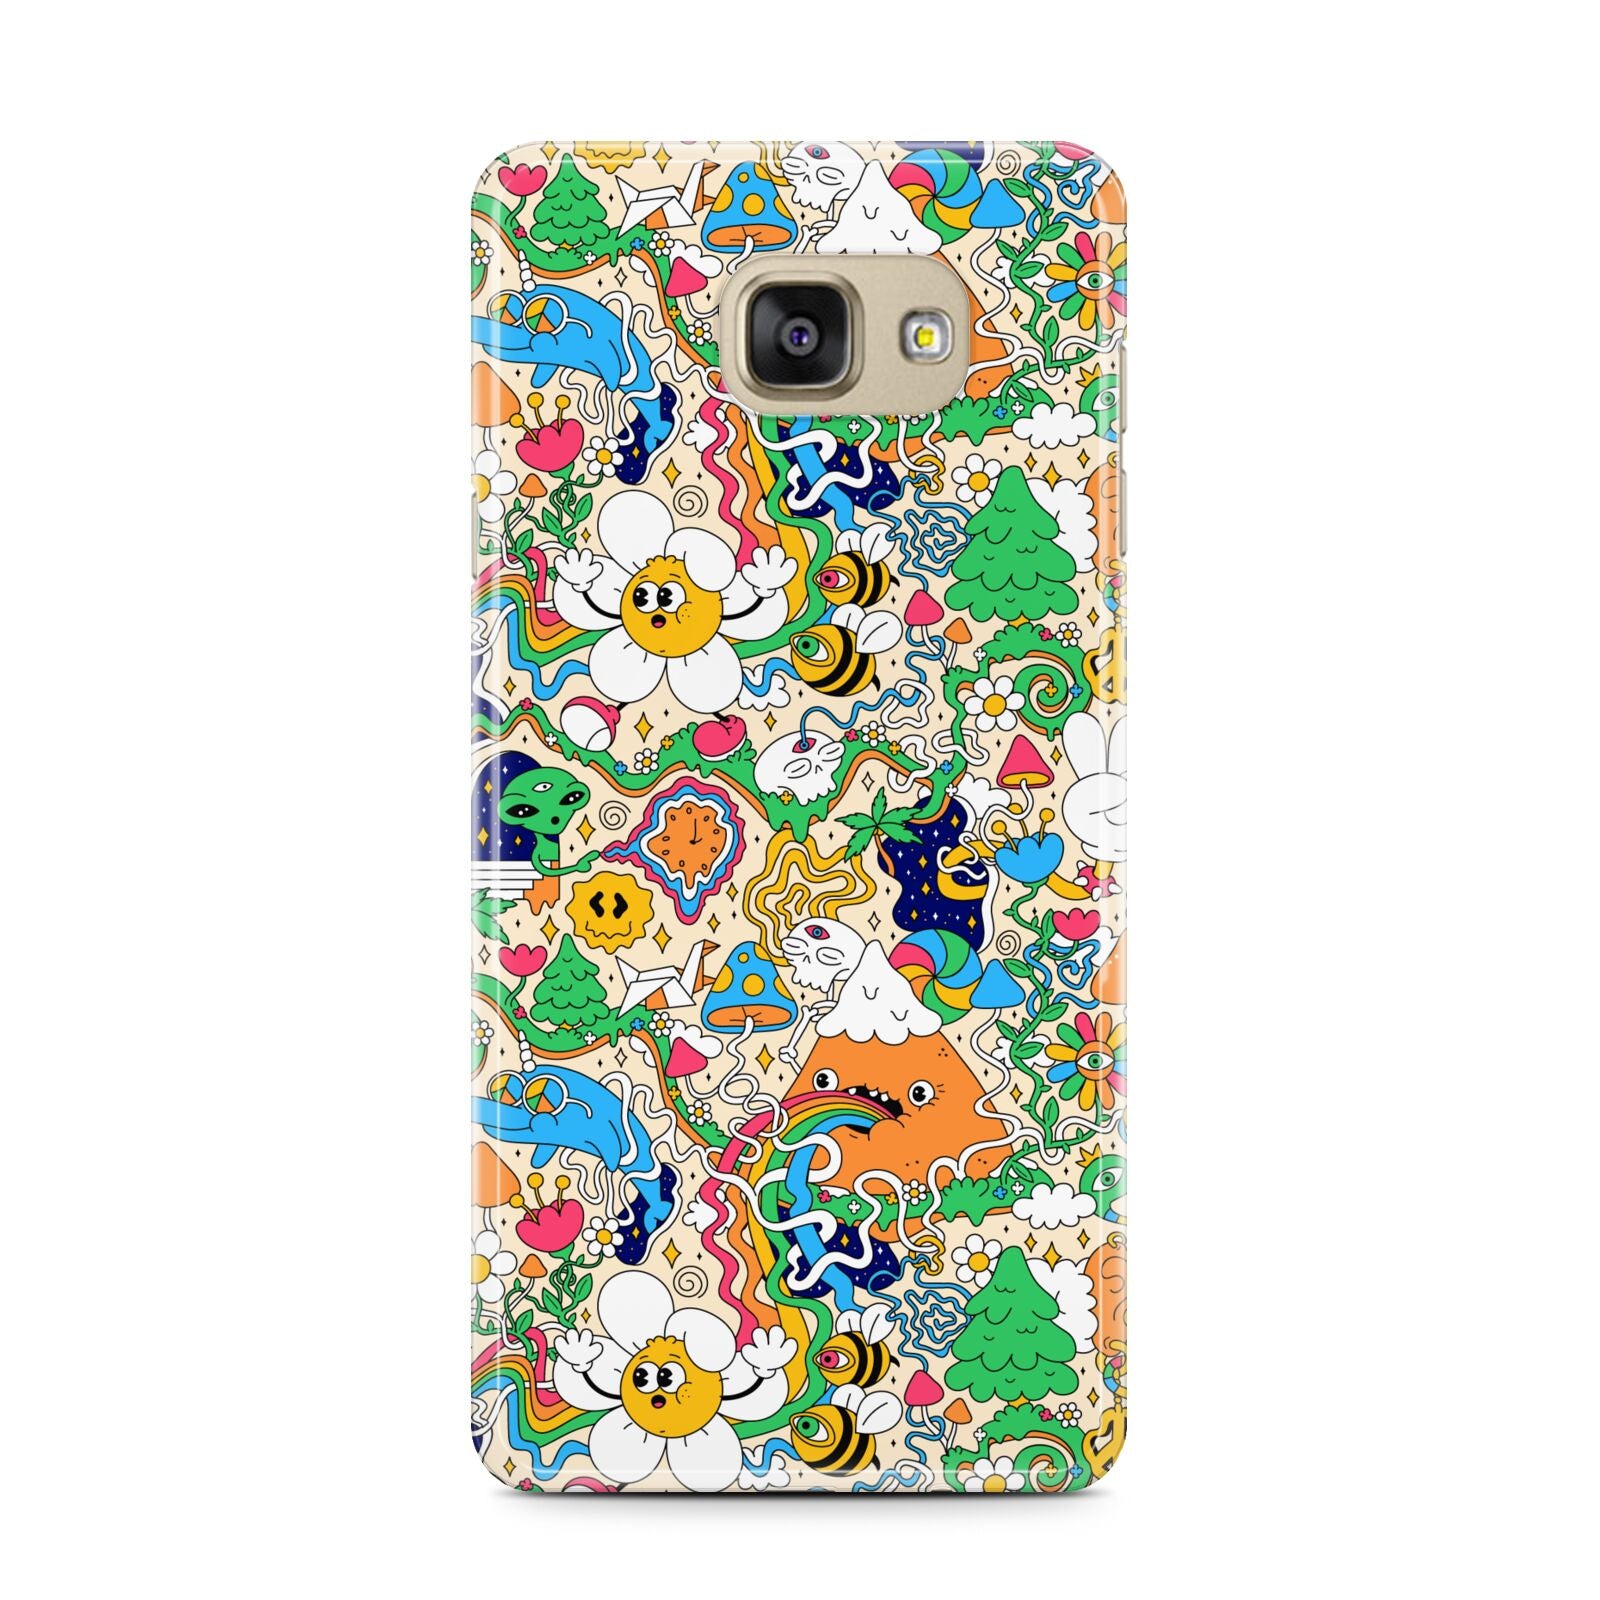 Psychedelic Trippy Samsung Galaxy A7 2016 Case on gold phone